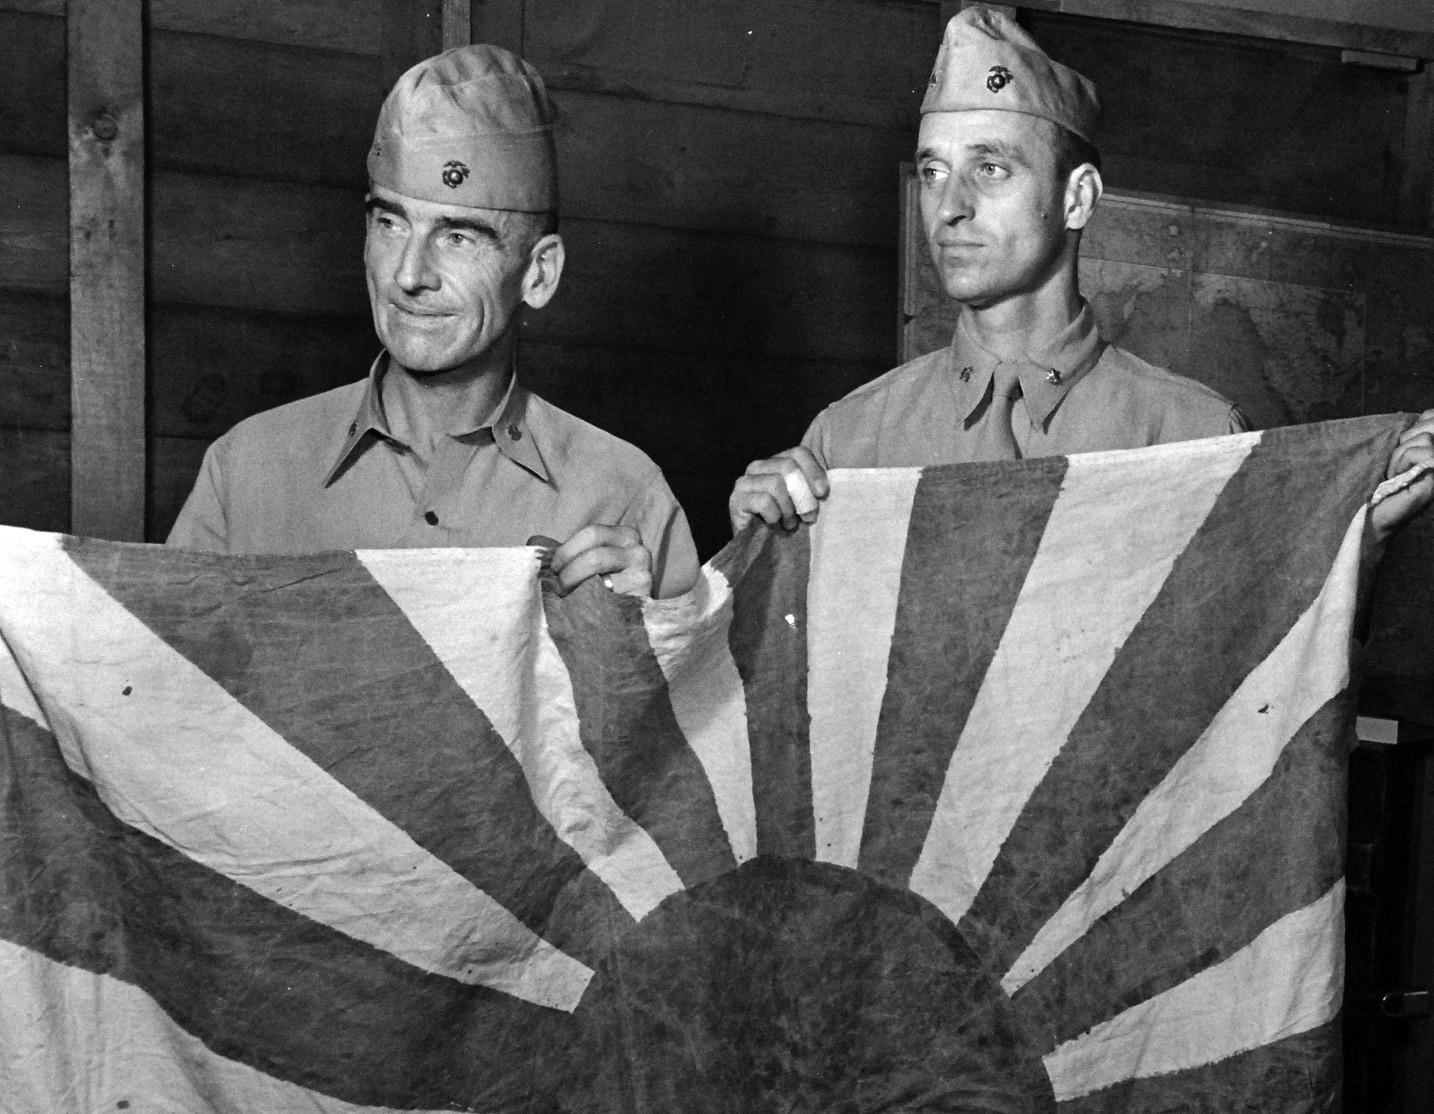 Marine officers Evans F. Carlson and James Roosevelt, son of President Franklin D. Roosevelt, led the 2nd Marine Raider Battalion on a daring raid against the Japanese garrison on the Pacific atoll of Makin. 